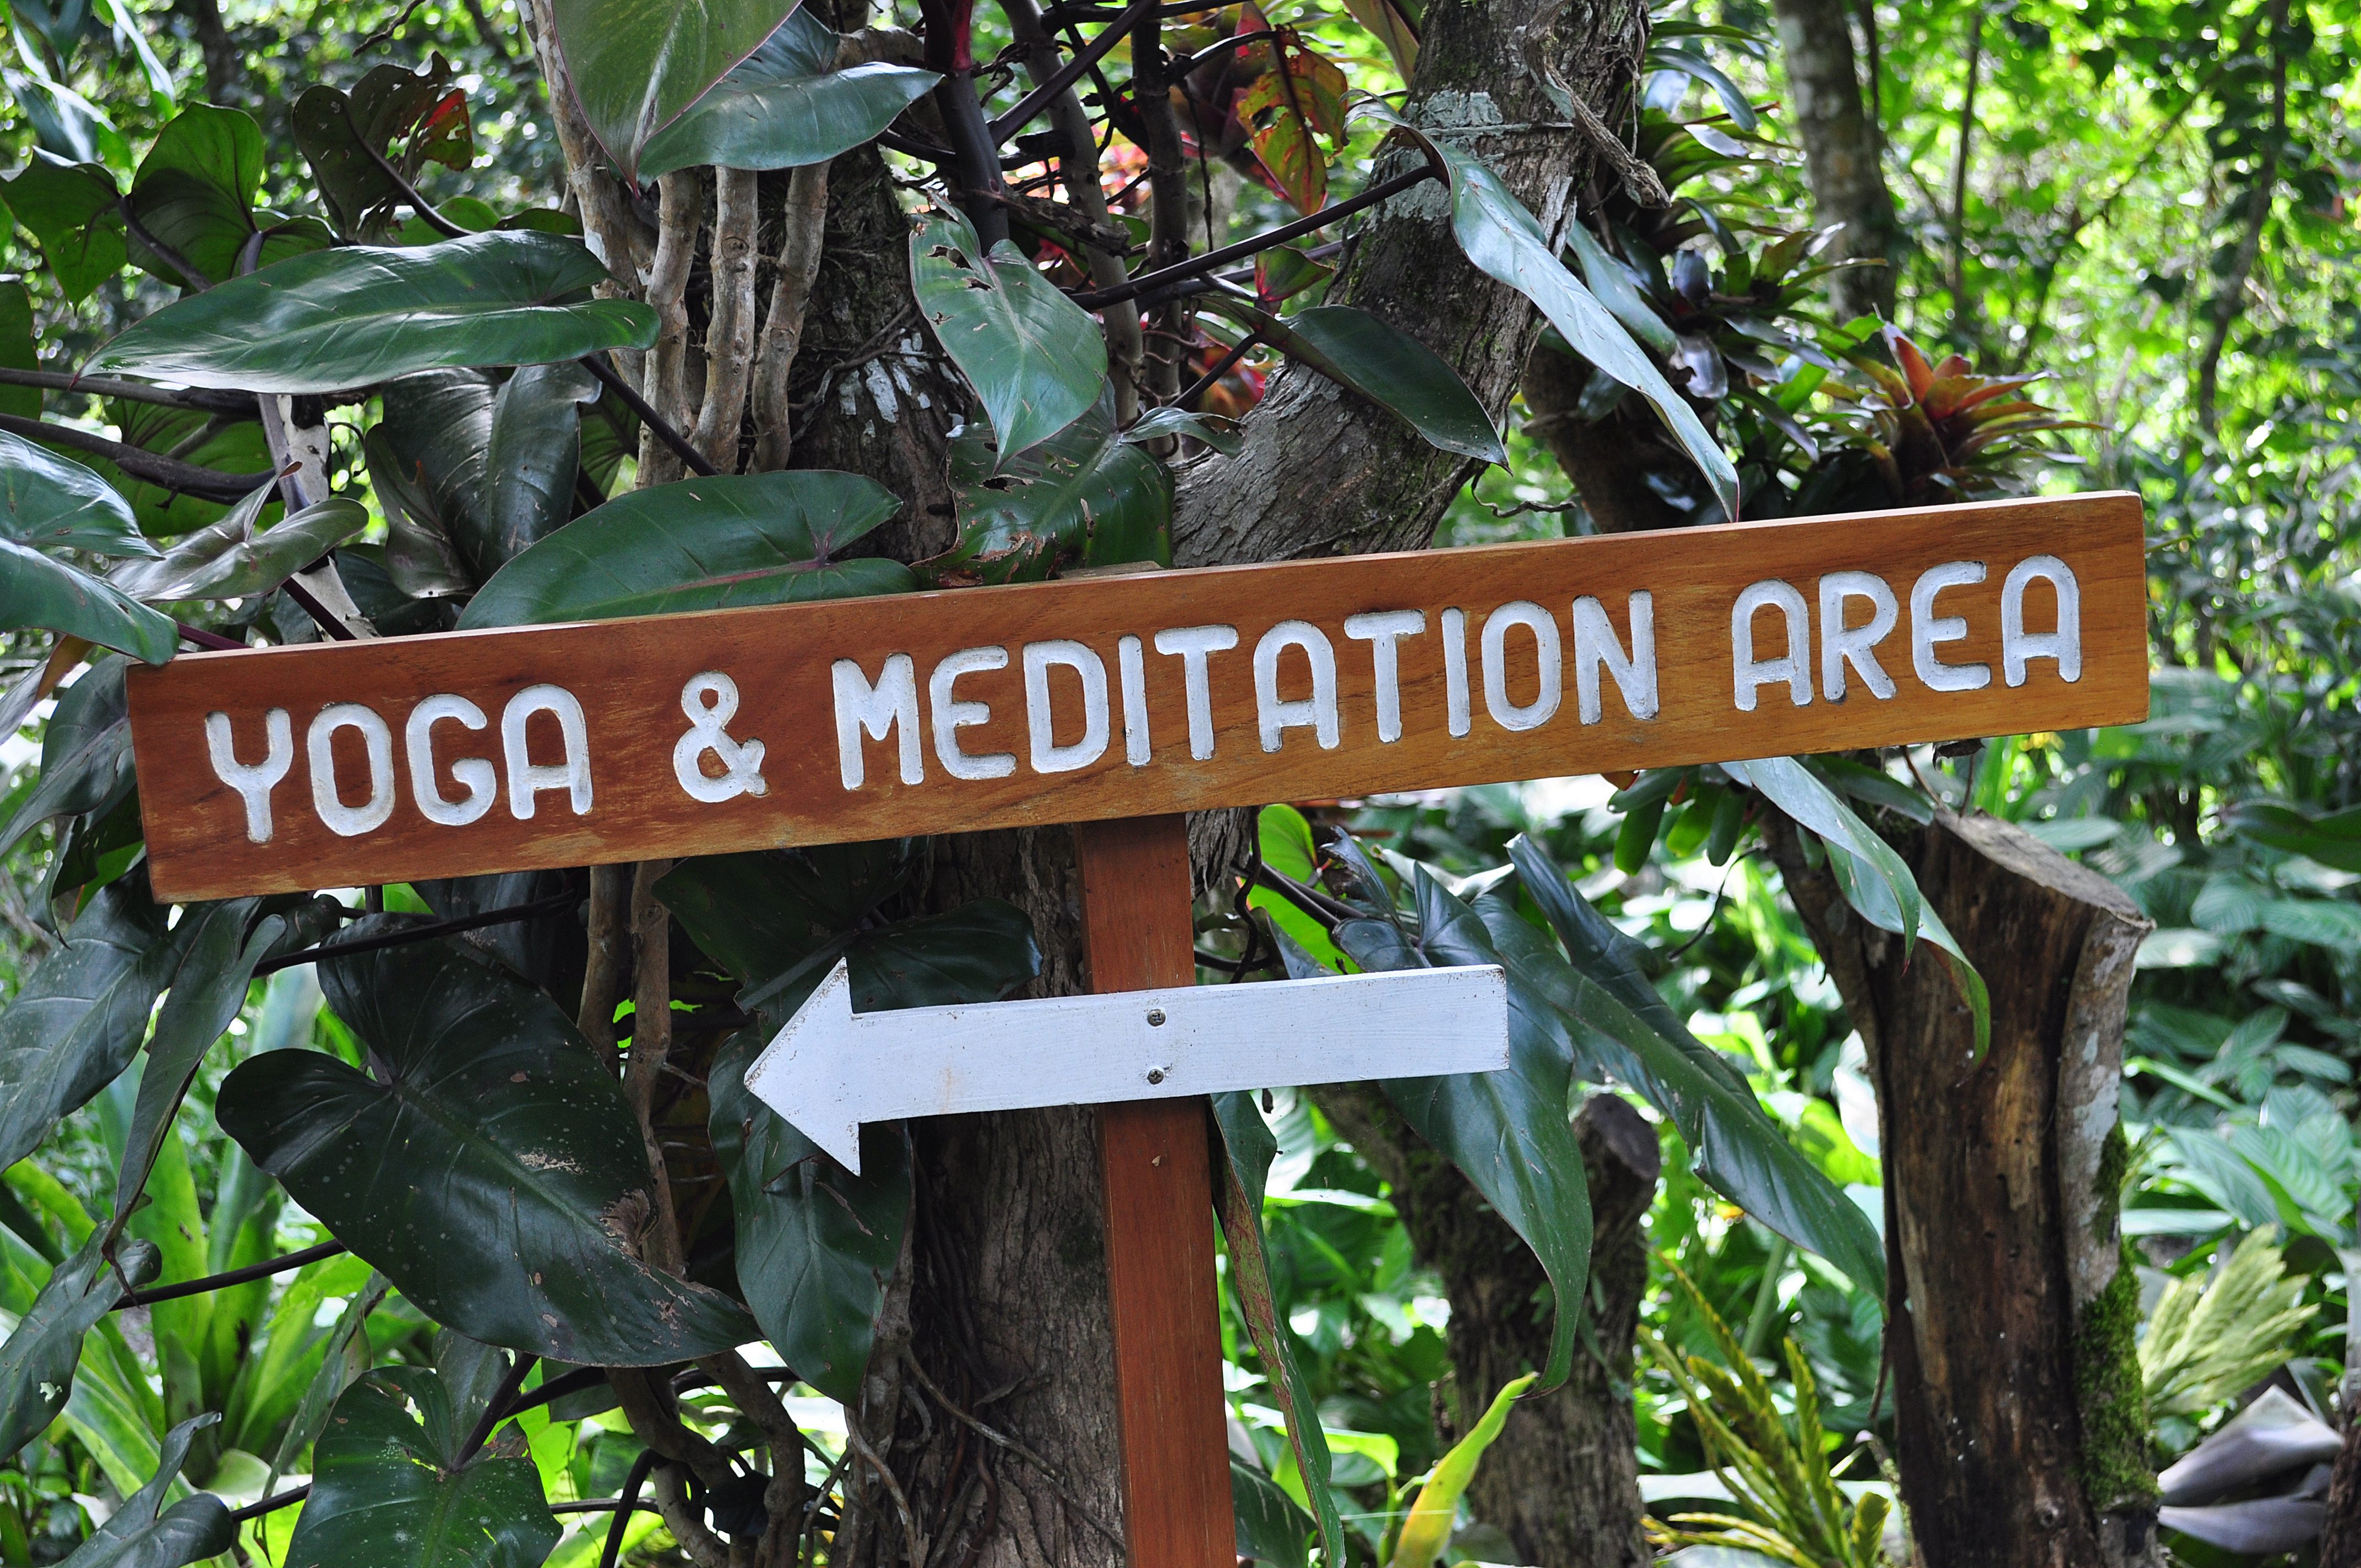 Sign pointing the way to a meditation area at a rural retreat site. Yoga and meditation retreats